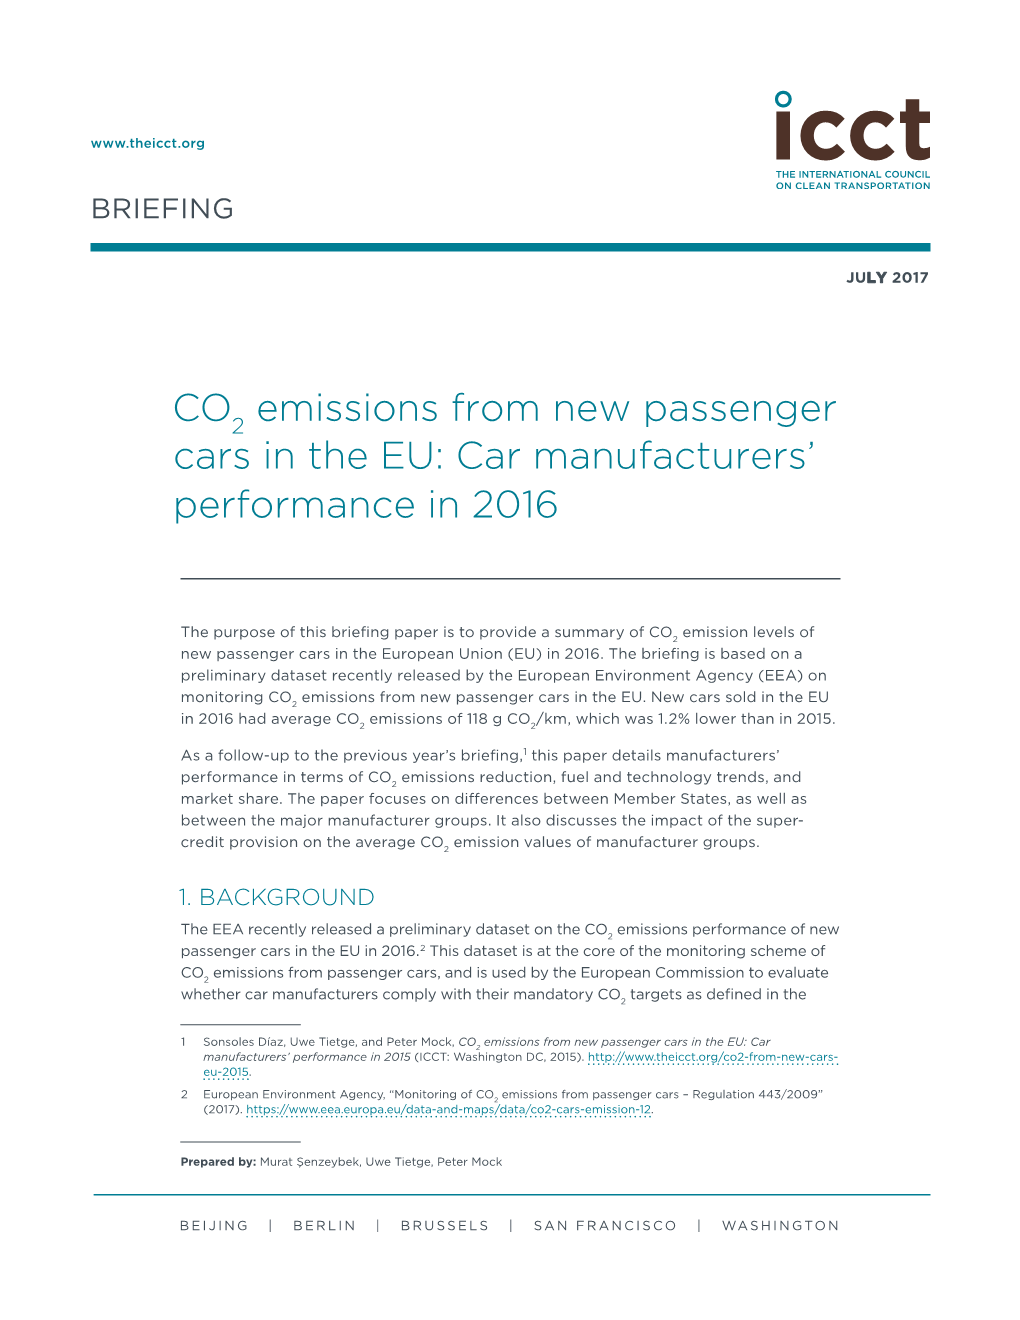 CO2 Emissions from New Passenger Cars in the EU: Car Manufacturers’ Performance in 2016